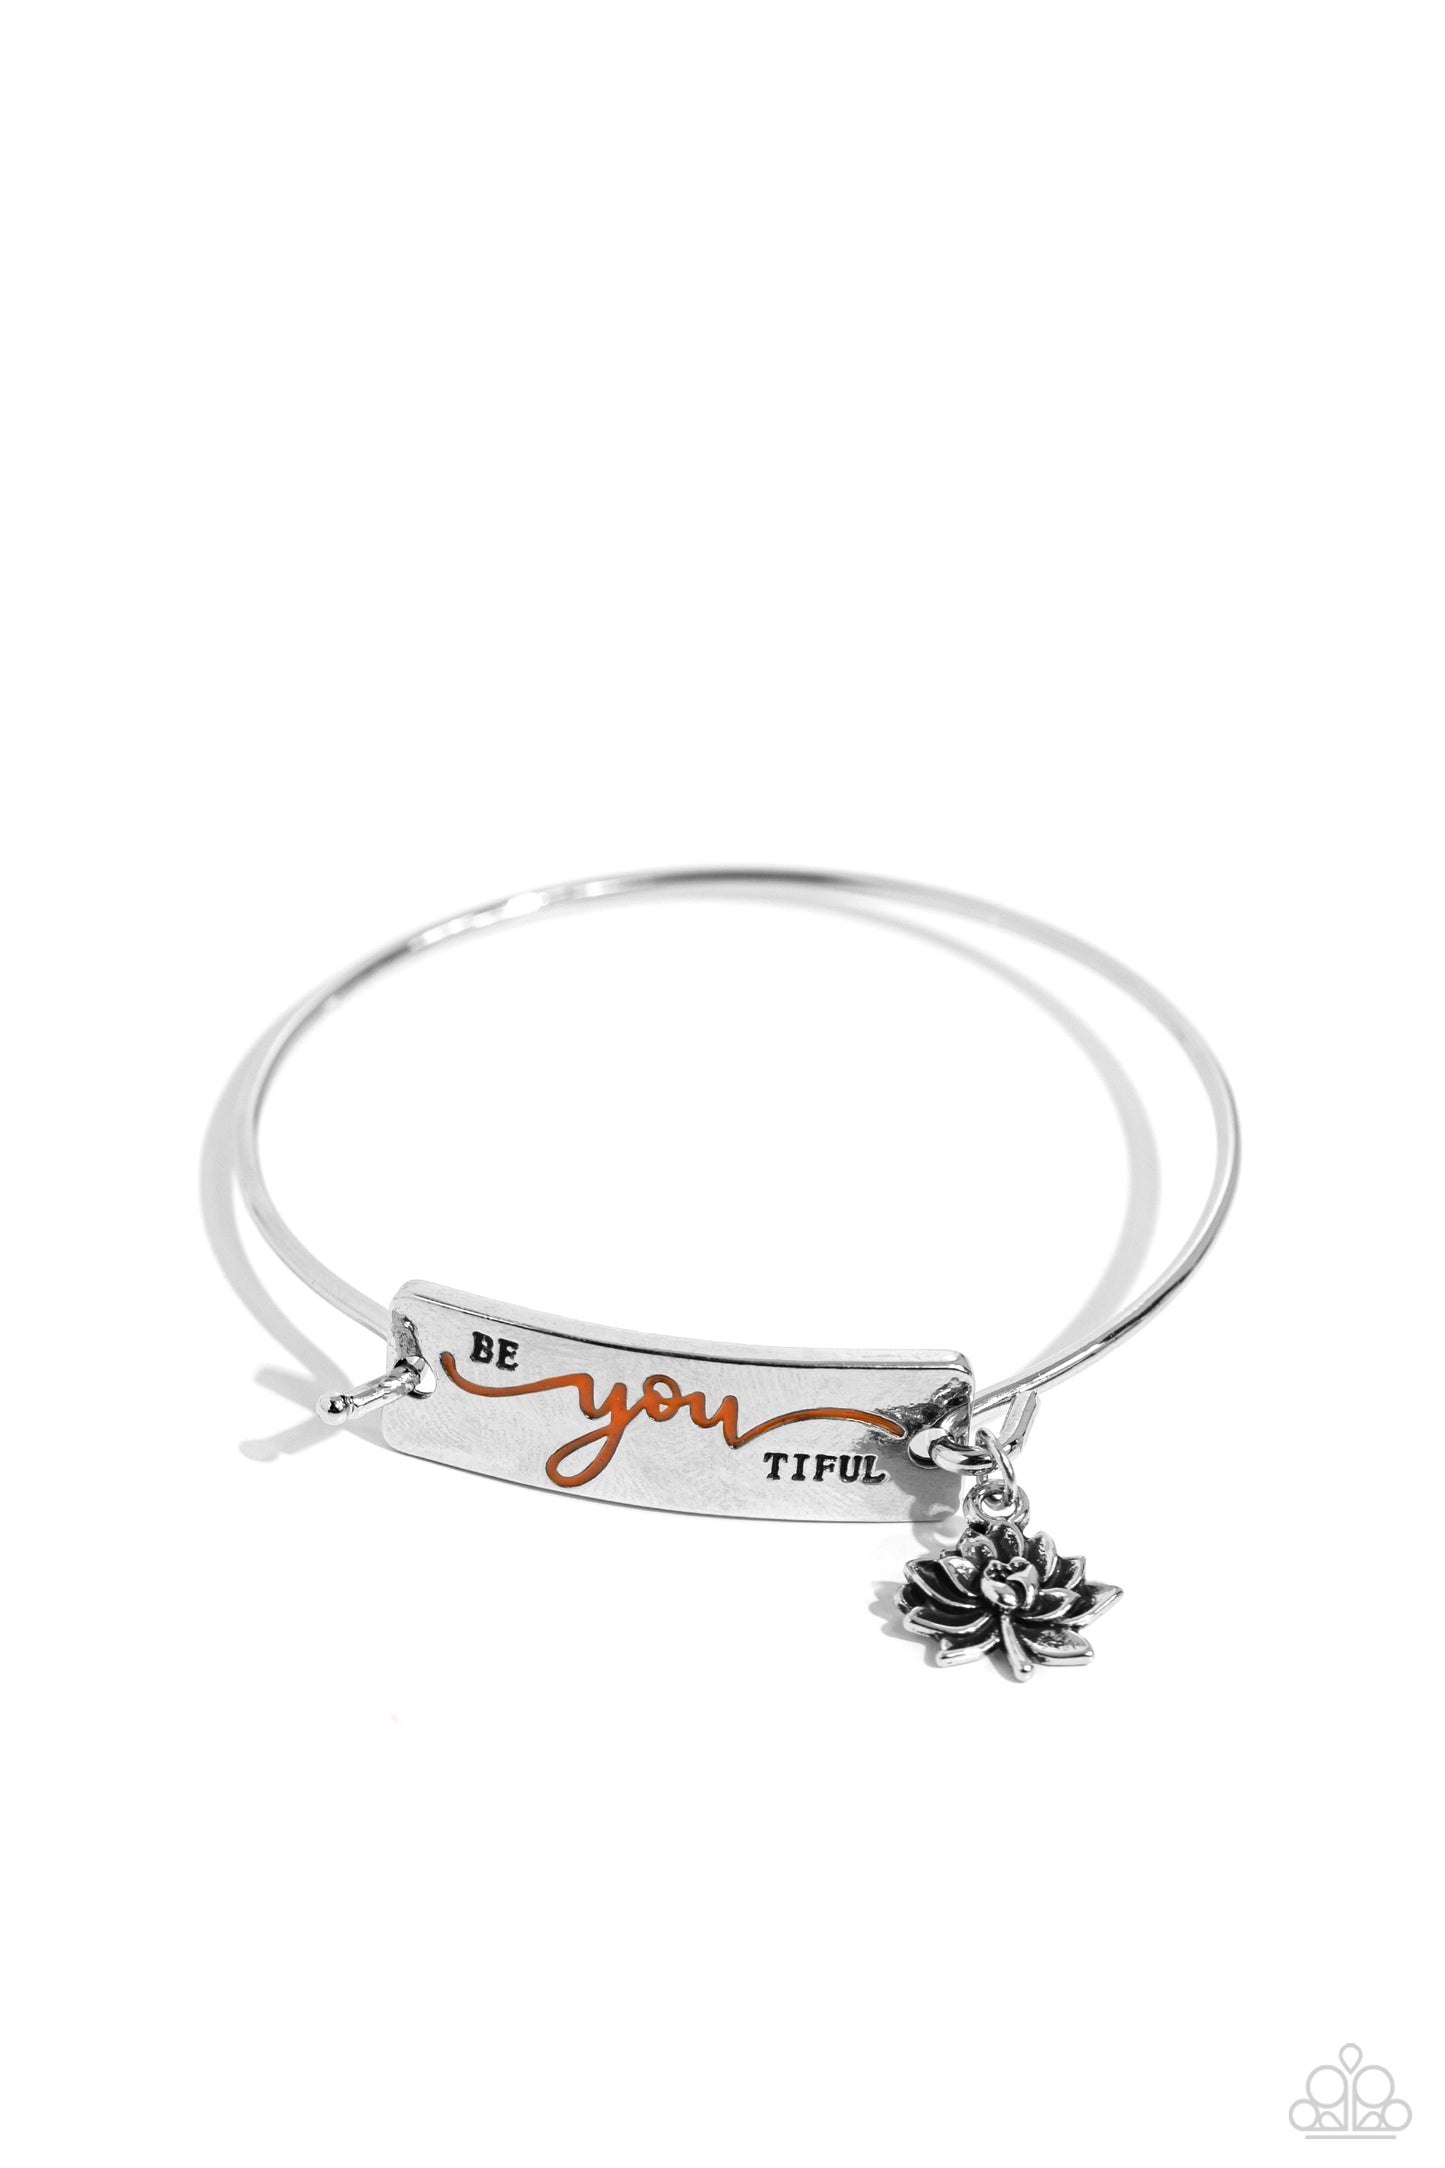 BeYOUtiful Bliss Orange Bracelet - Paparazzi Accessories  The word "BeYOUtiful" is stamped across a thick plate of silver, with the "YOU" in a playful orange font. A textured, silver lotus flower charm gathers at the side of the inspirational centerpiece as it connects to a skinny silver bar that wraps around the wrist. Features a hook and eye closure.  Sold as one individual bracelet.  P9WD-OGXX-045XX